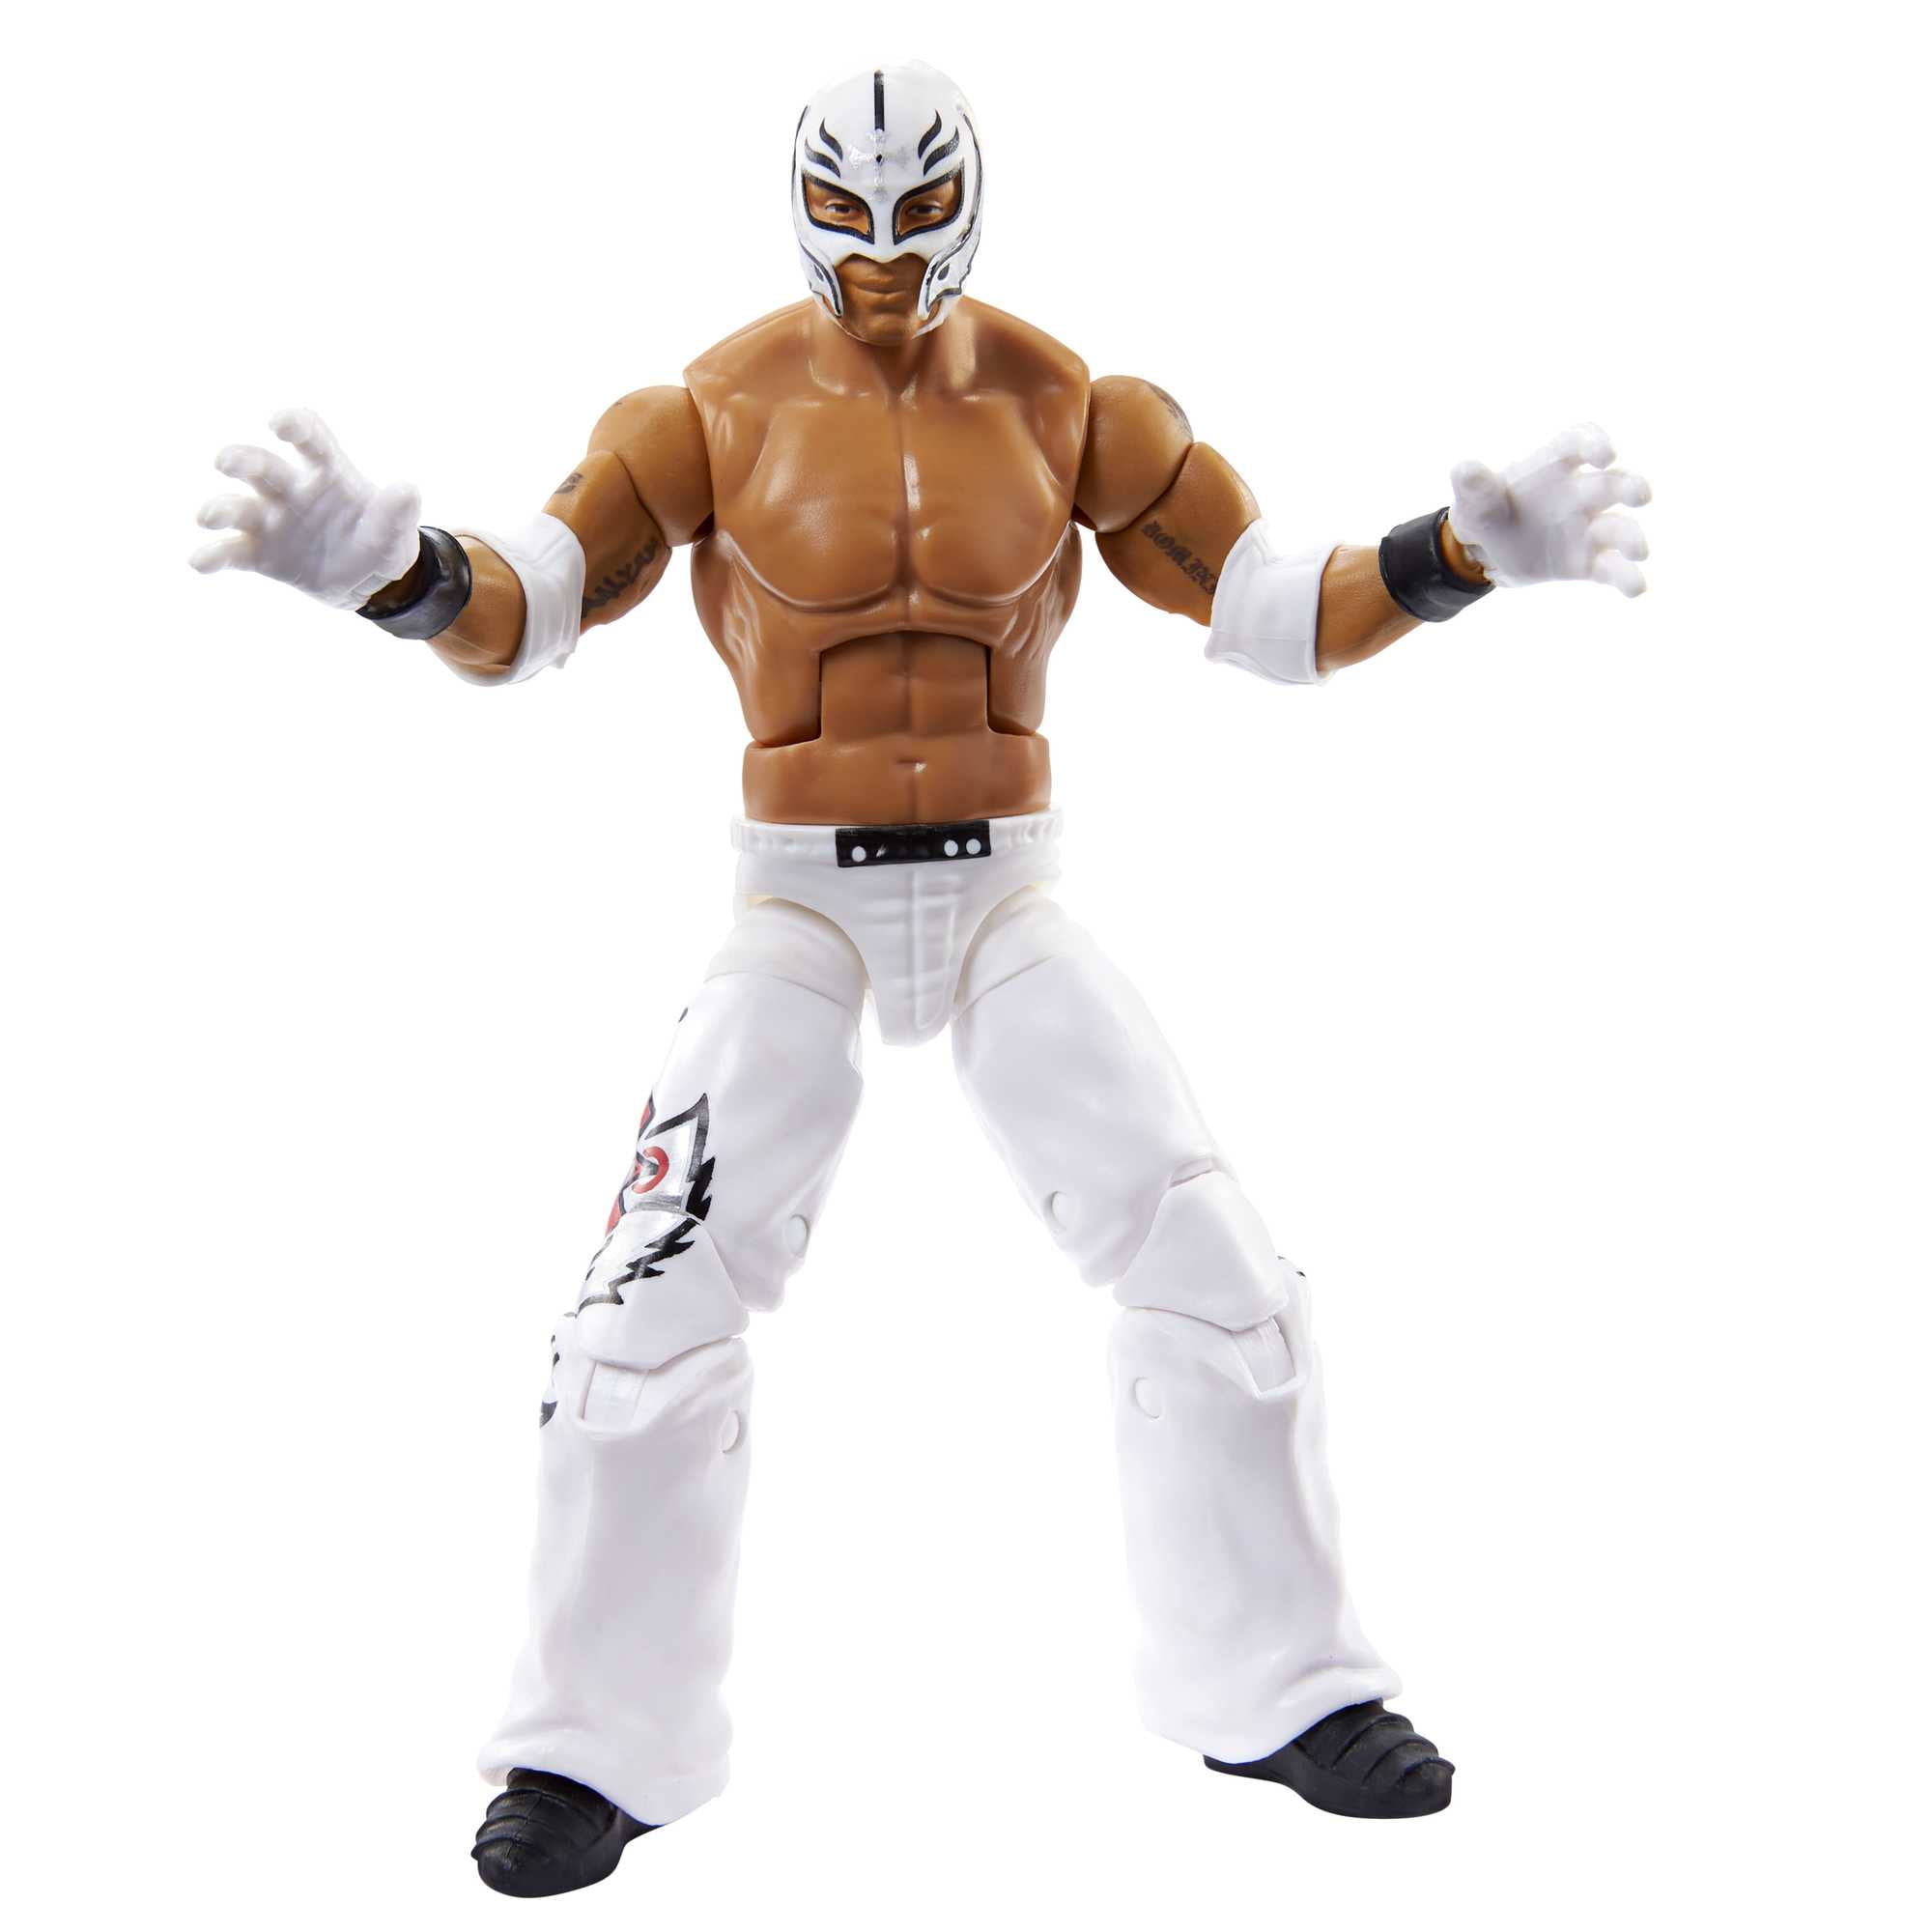 WWE Ruthless Aggression Elite Collection Action Figures with Accessories  (6-inch) (Styles May Vary) 